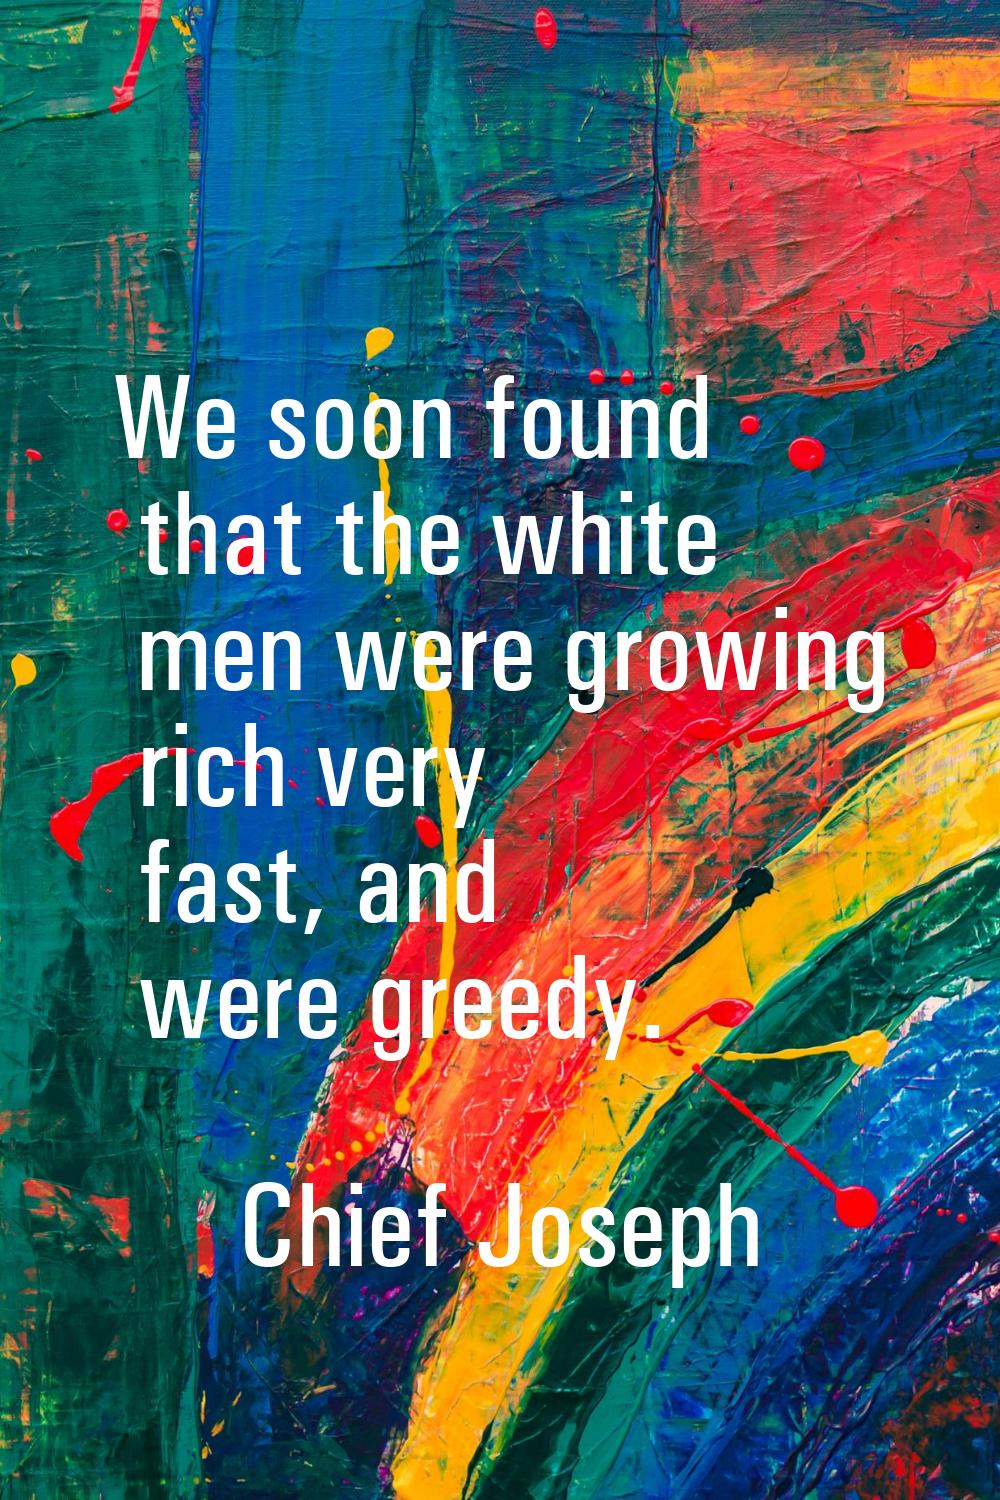 We soon found that the white men were growing rich very fast, and were greedy.